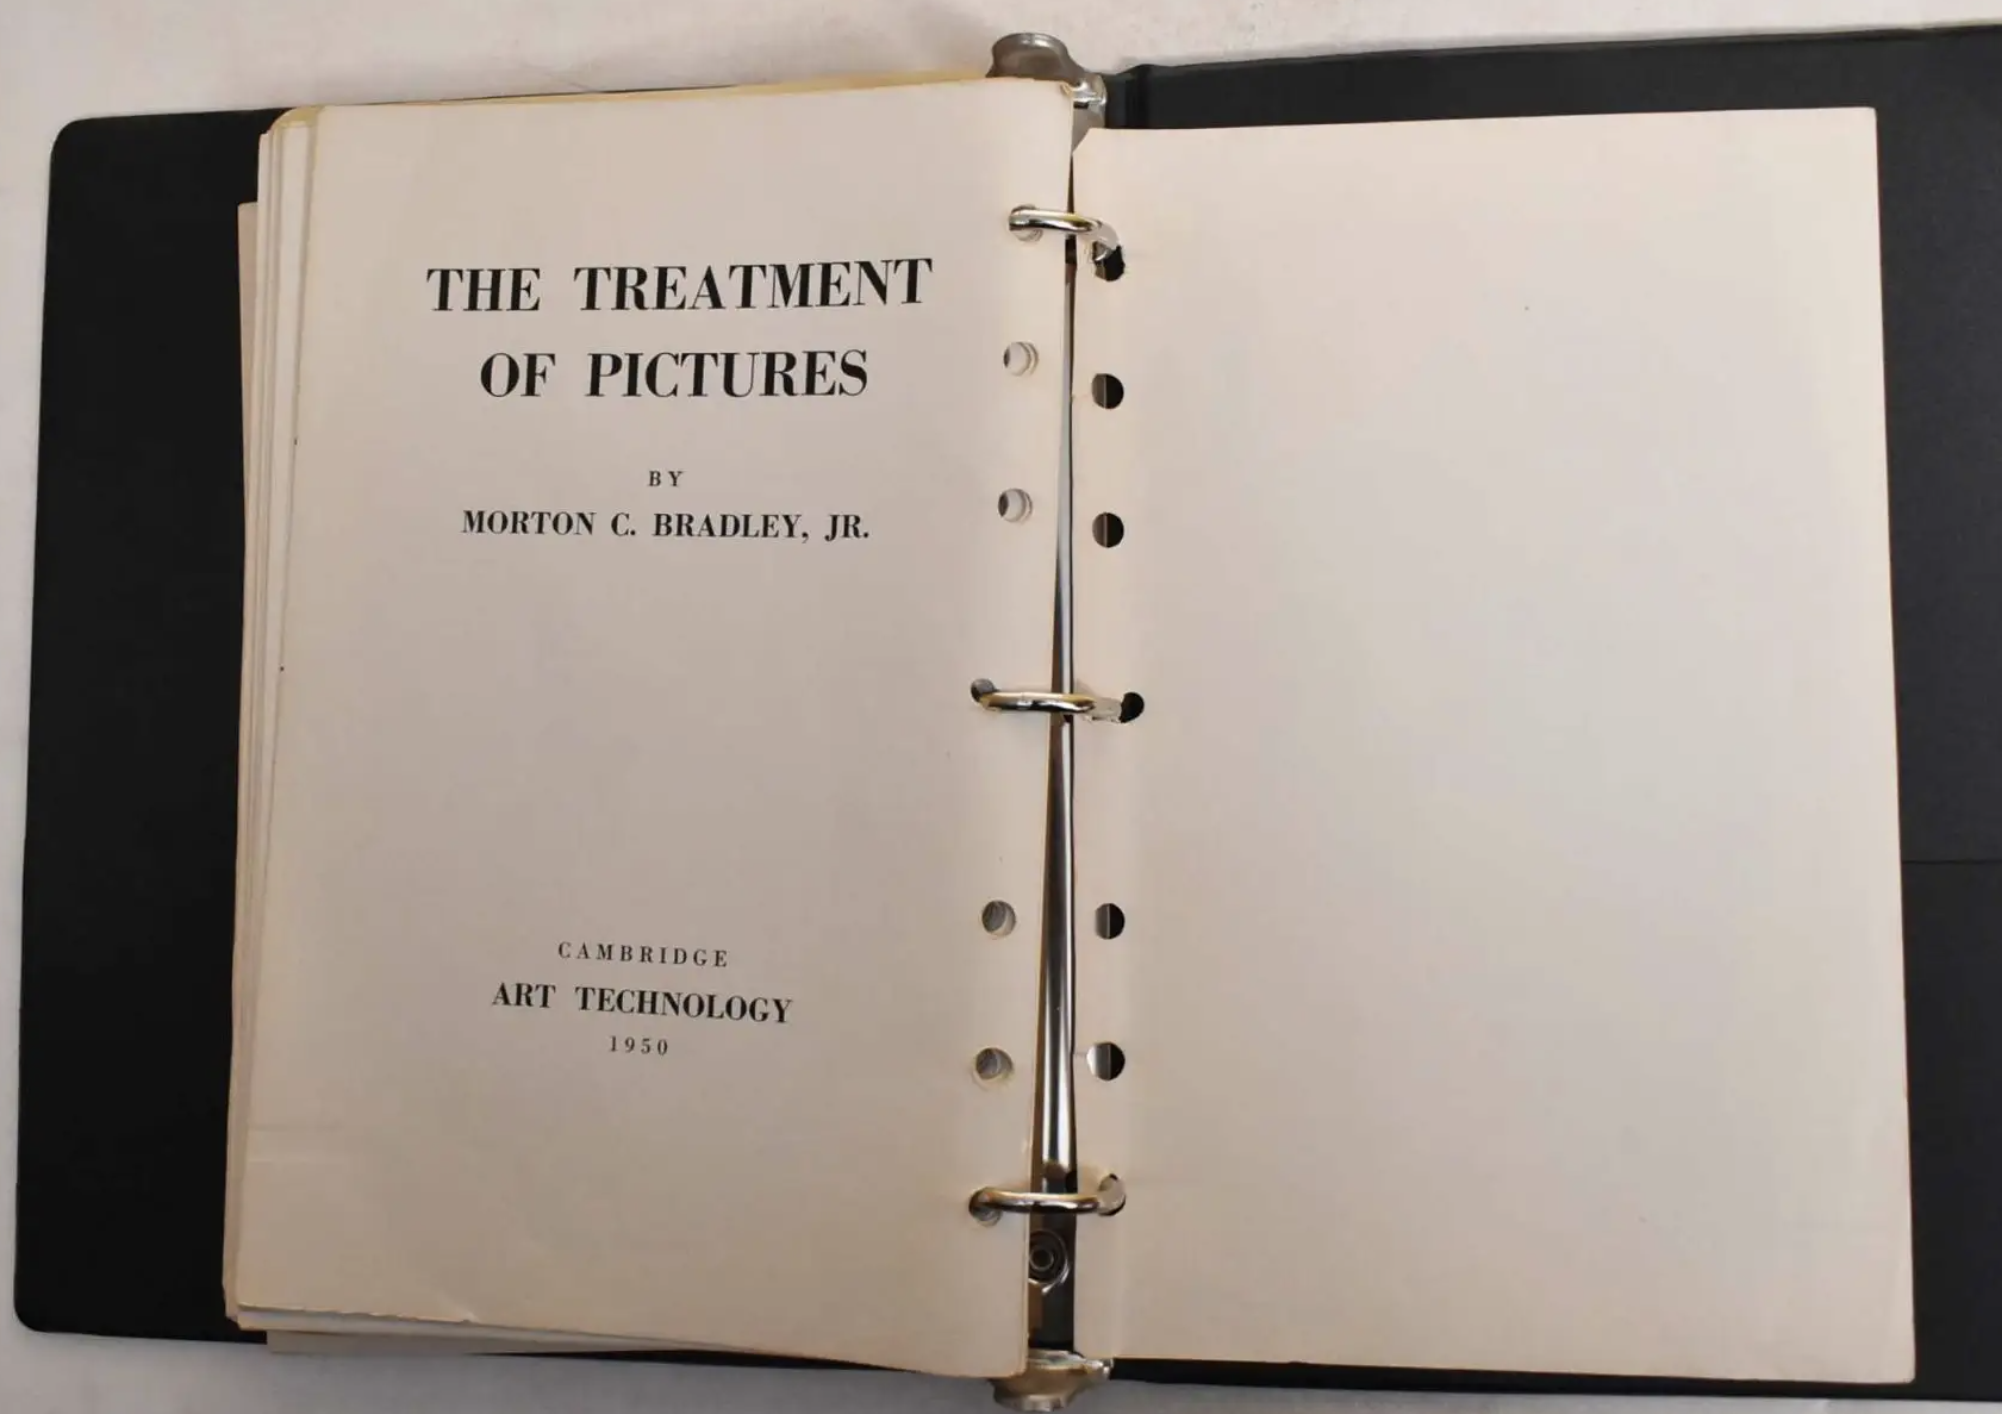 A loose leaf binder of hole-punched pages is open to a title page which reads The Treatment of Pictures by Morton C. Bradley Jr.